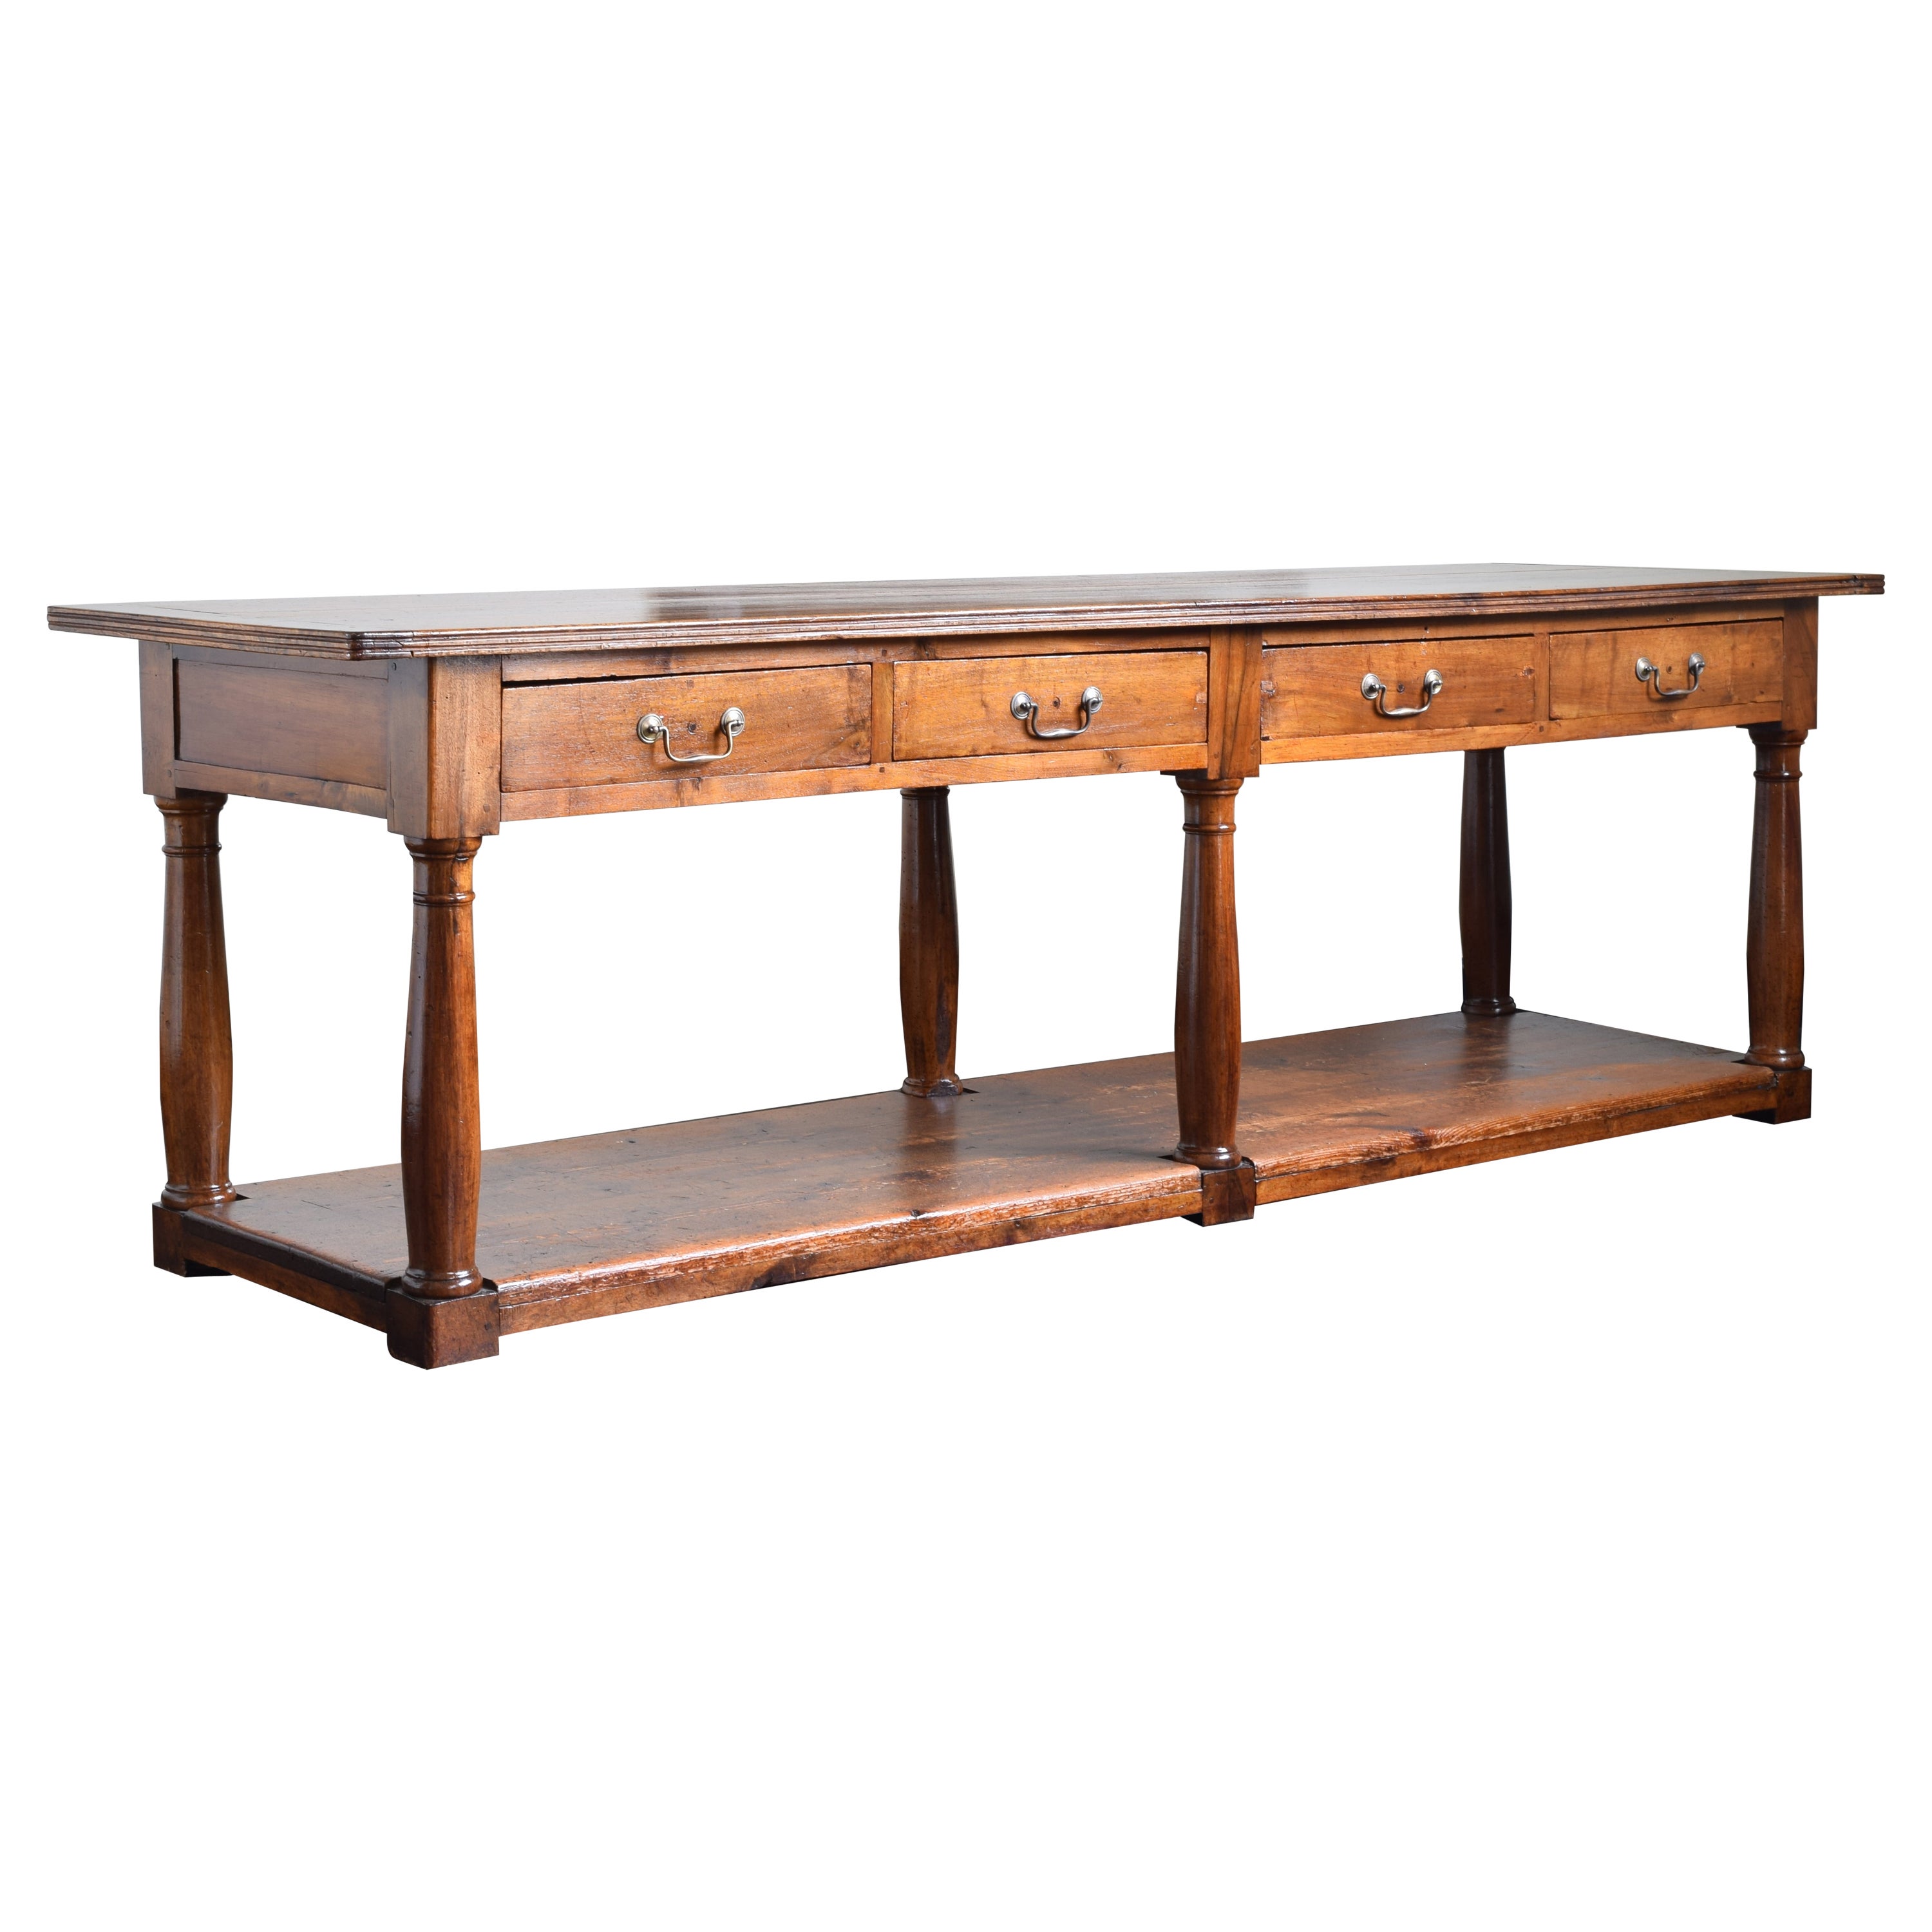 French Louis Philippe Walnut Draper’s Table 4 Drawers, Shelf at Base, circa 1835